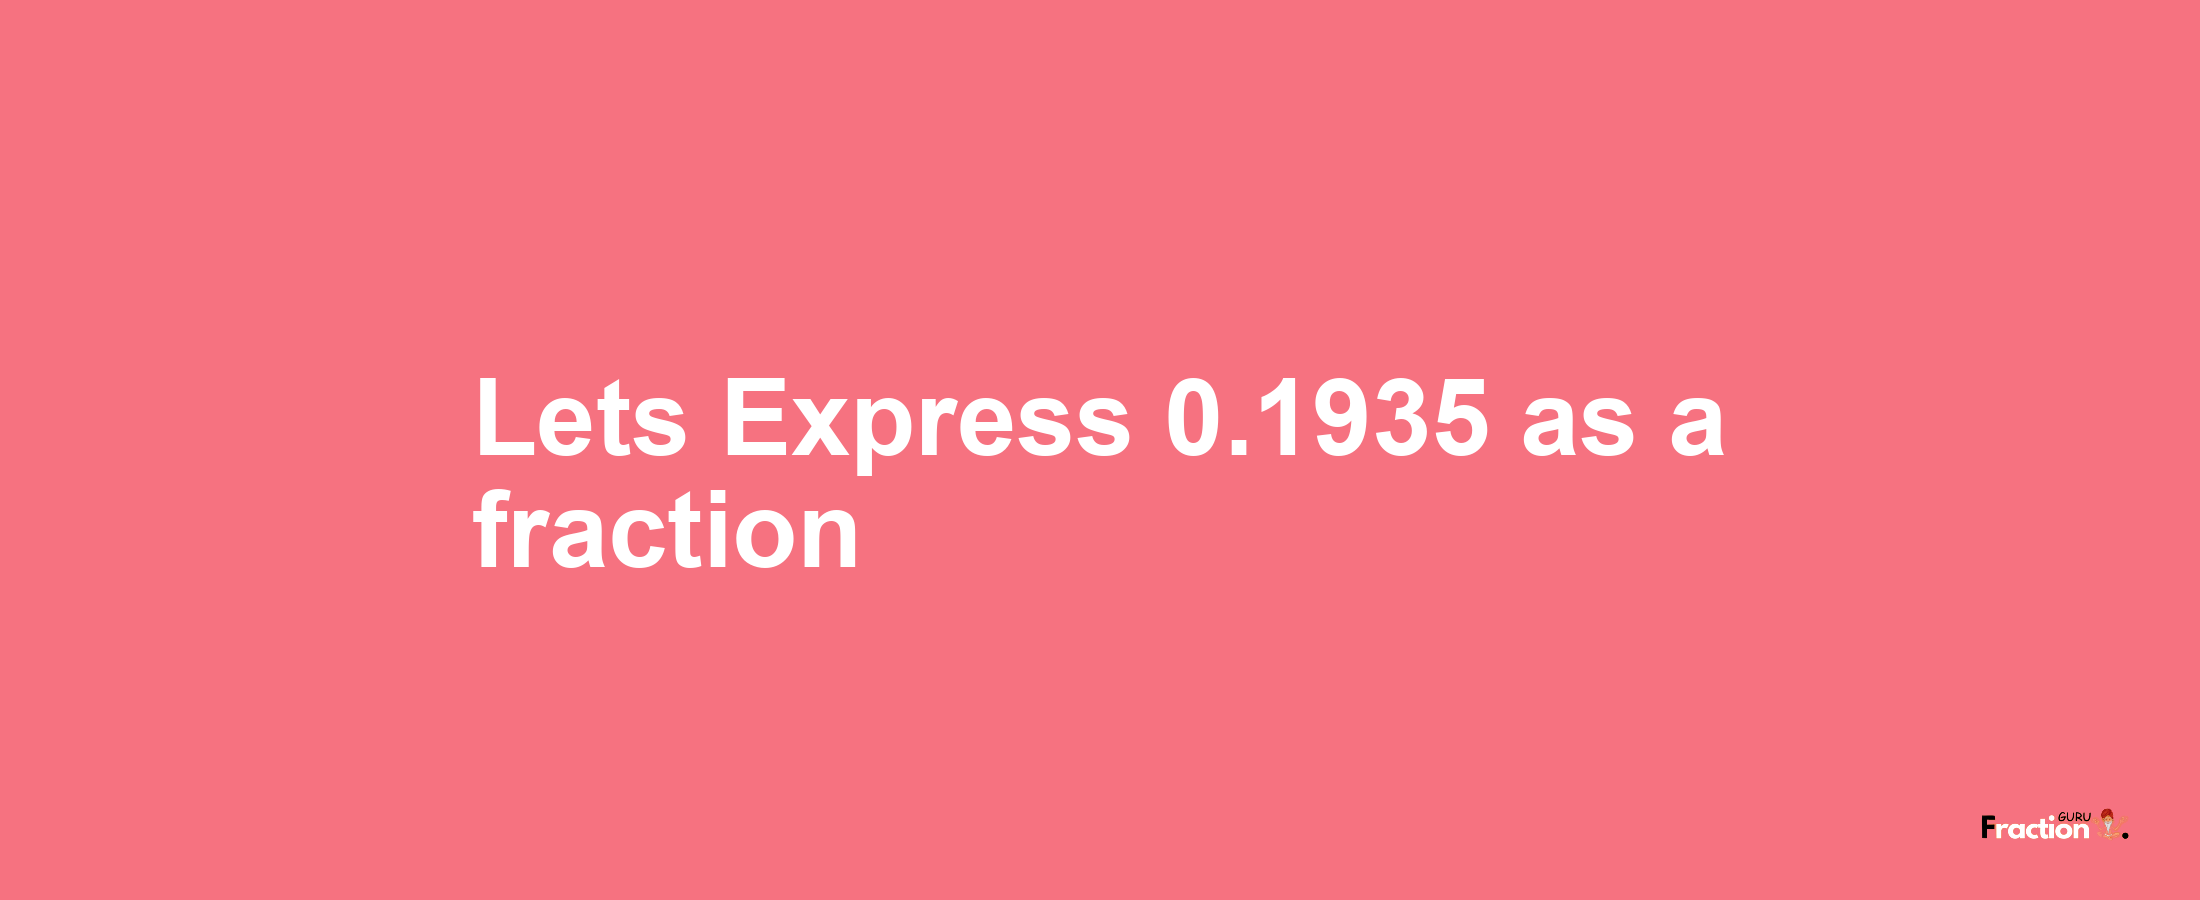 Lets Express 0.1935 as afraction